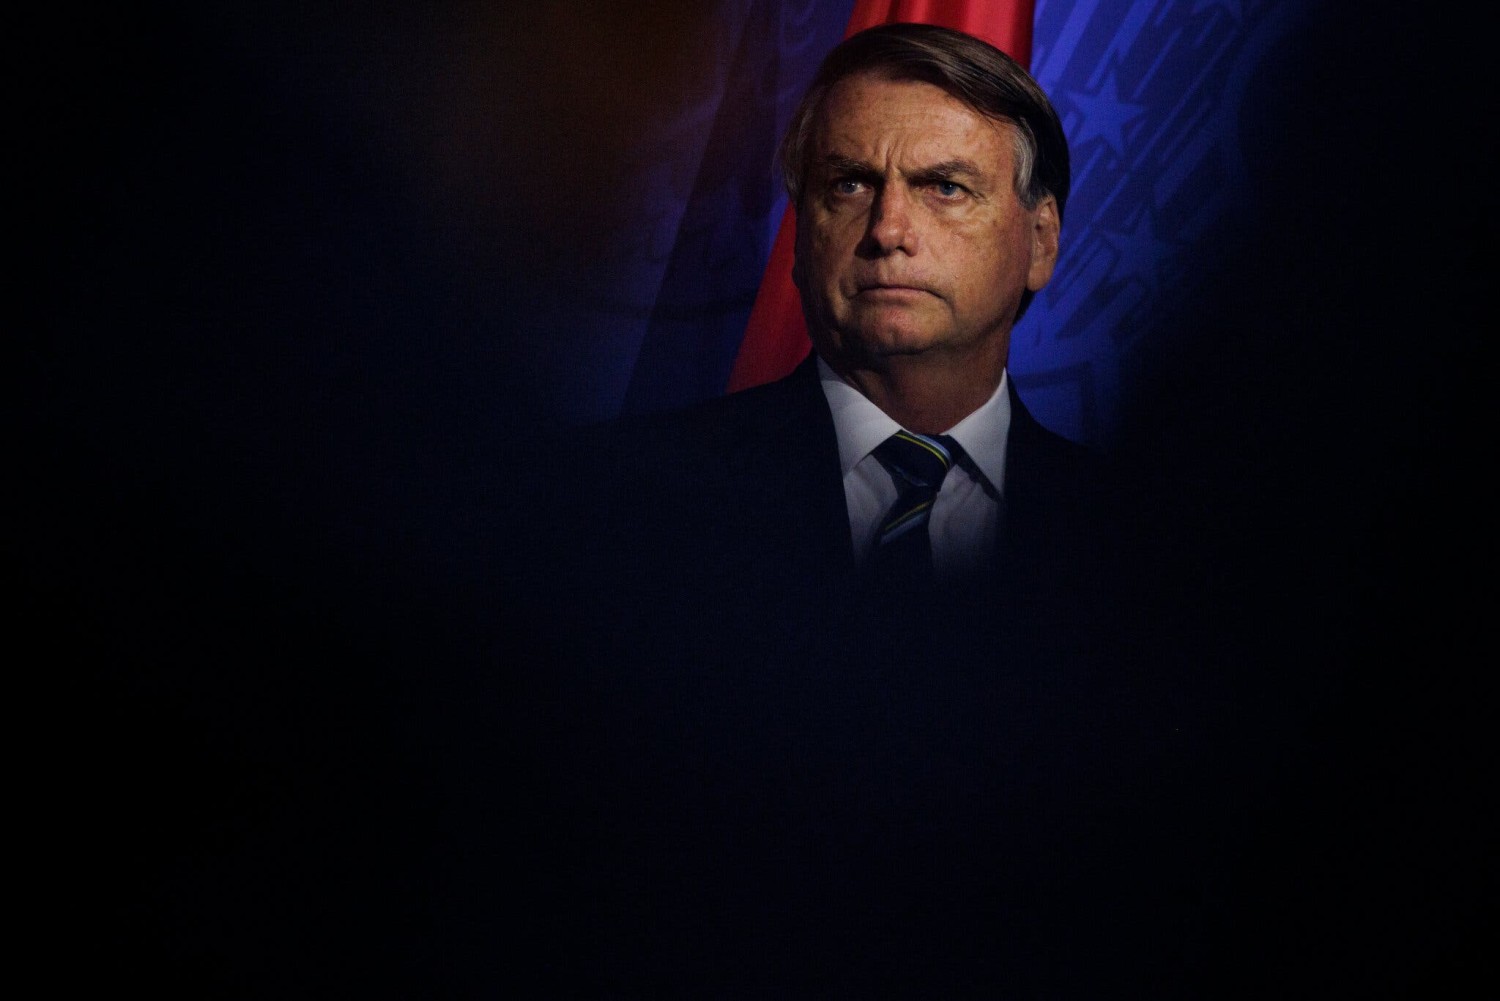 Jair Bolsonaro, the former Brazilian president, denies wrongdoing in each of the investigations into him, saying the allegations are fabrications that amount to political persecution.Credit...Samuel Corum for The New York Times